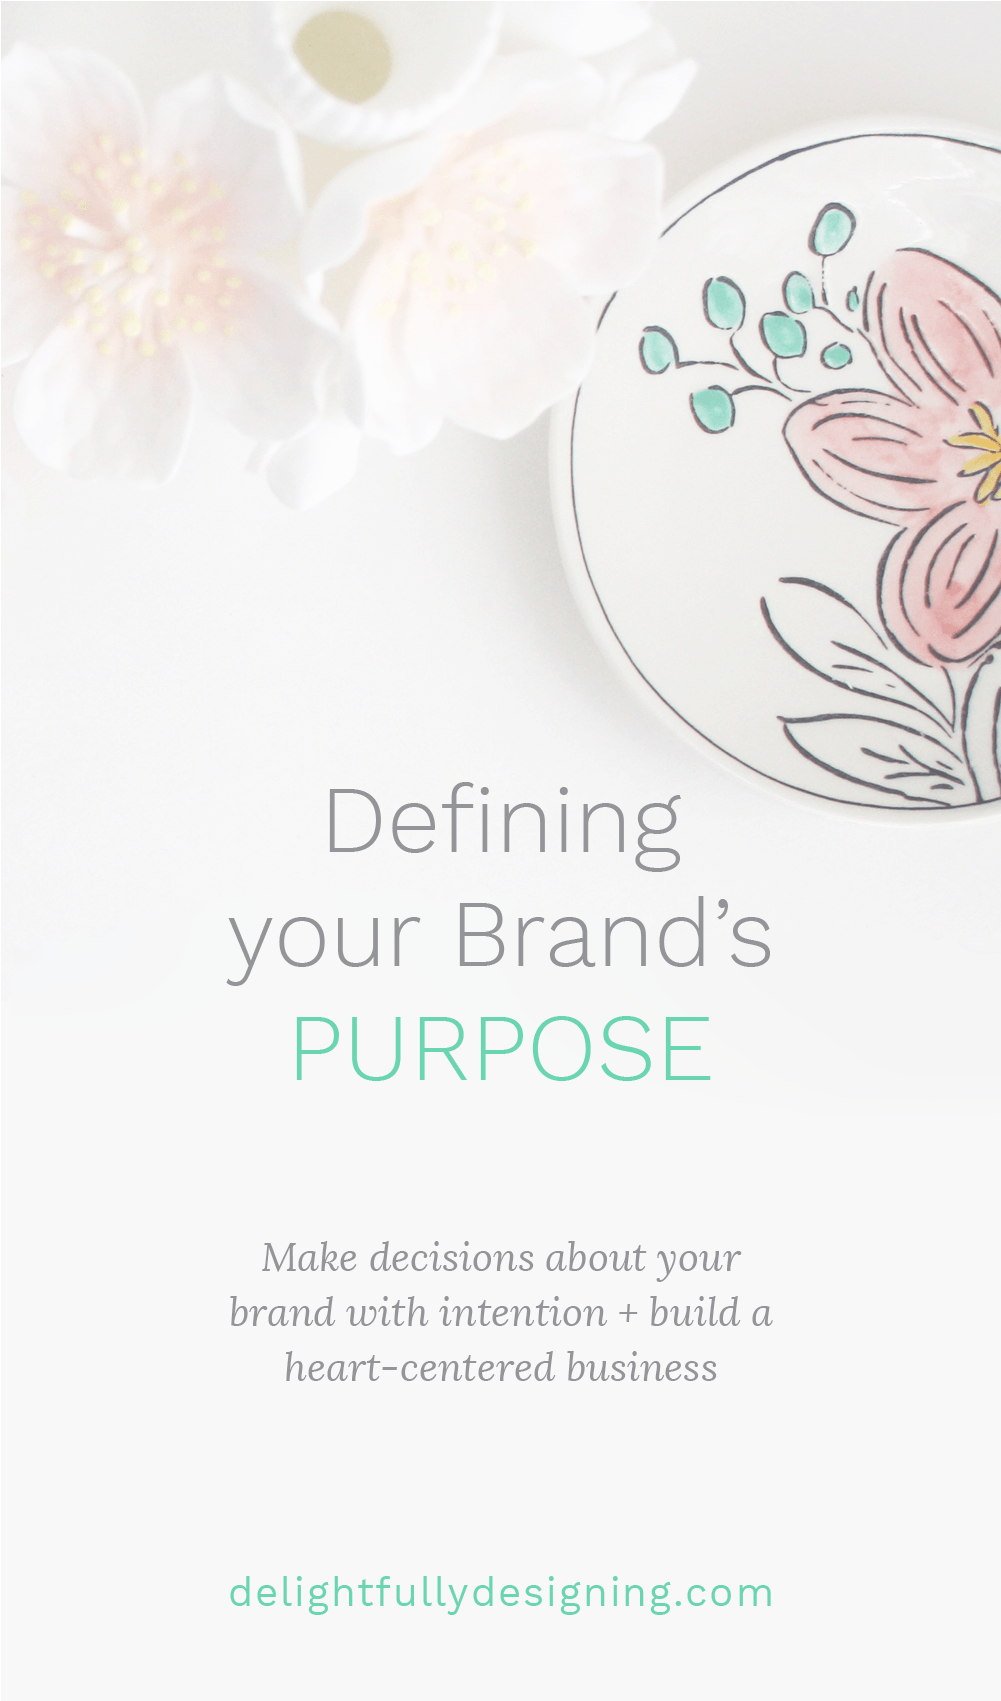 Make decisions about your brand with intention + build a heart-centered business